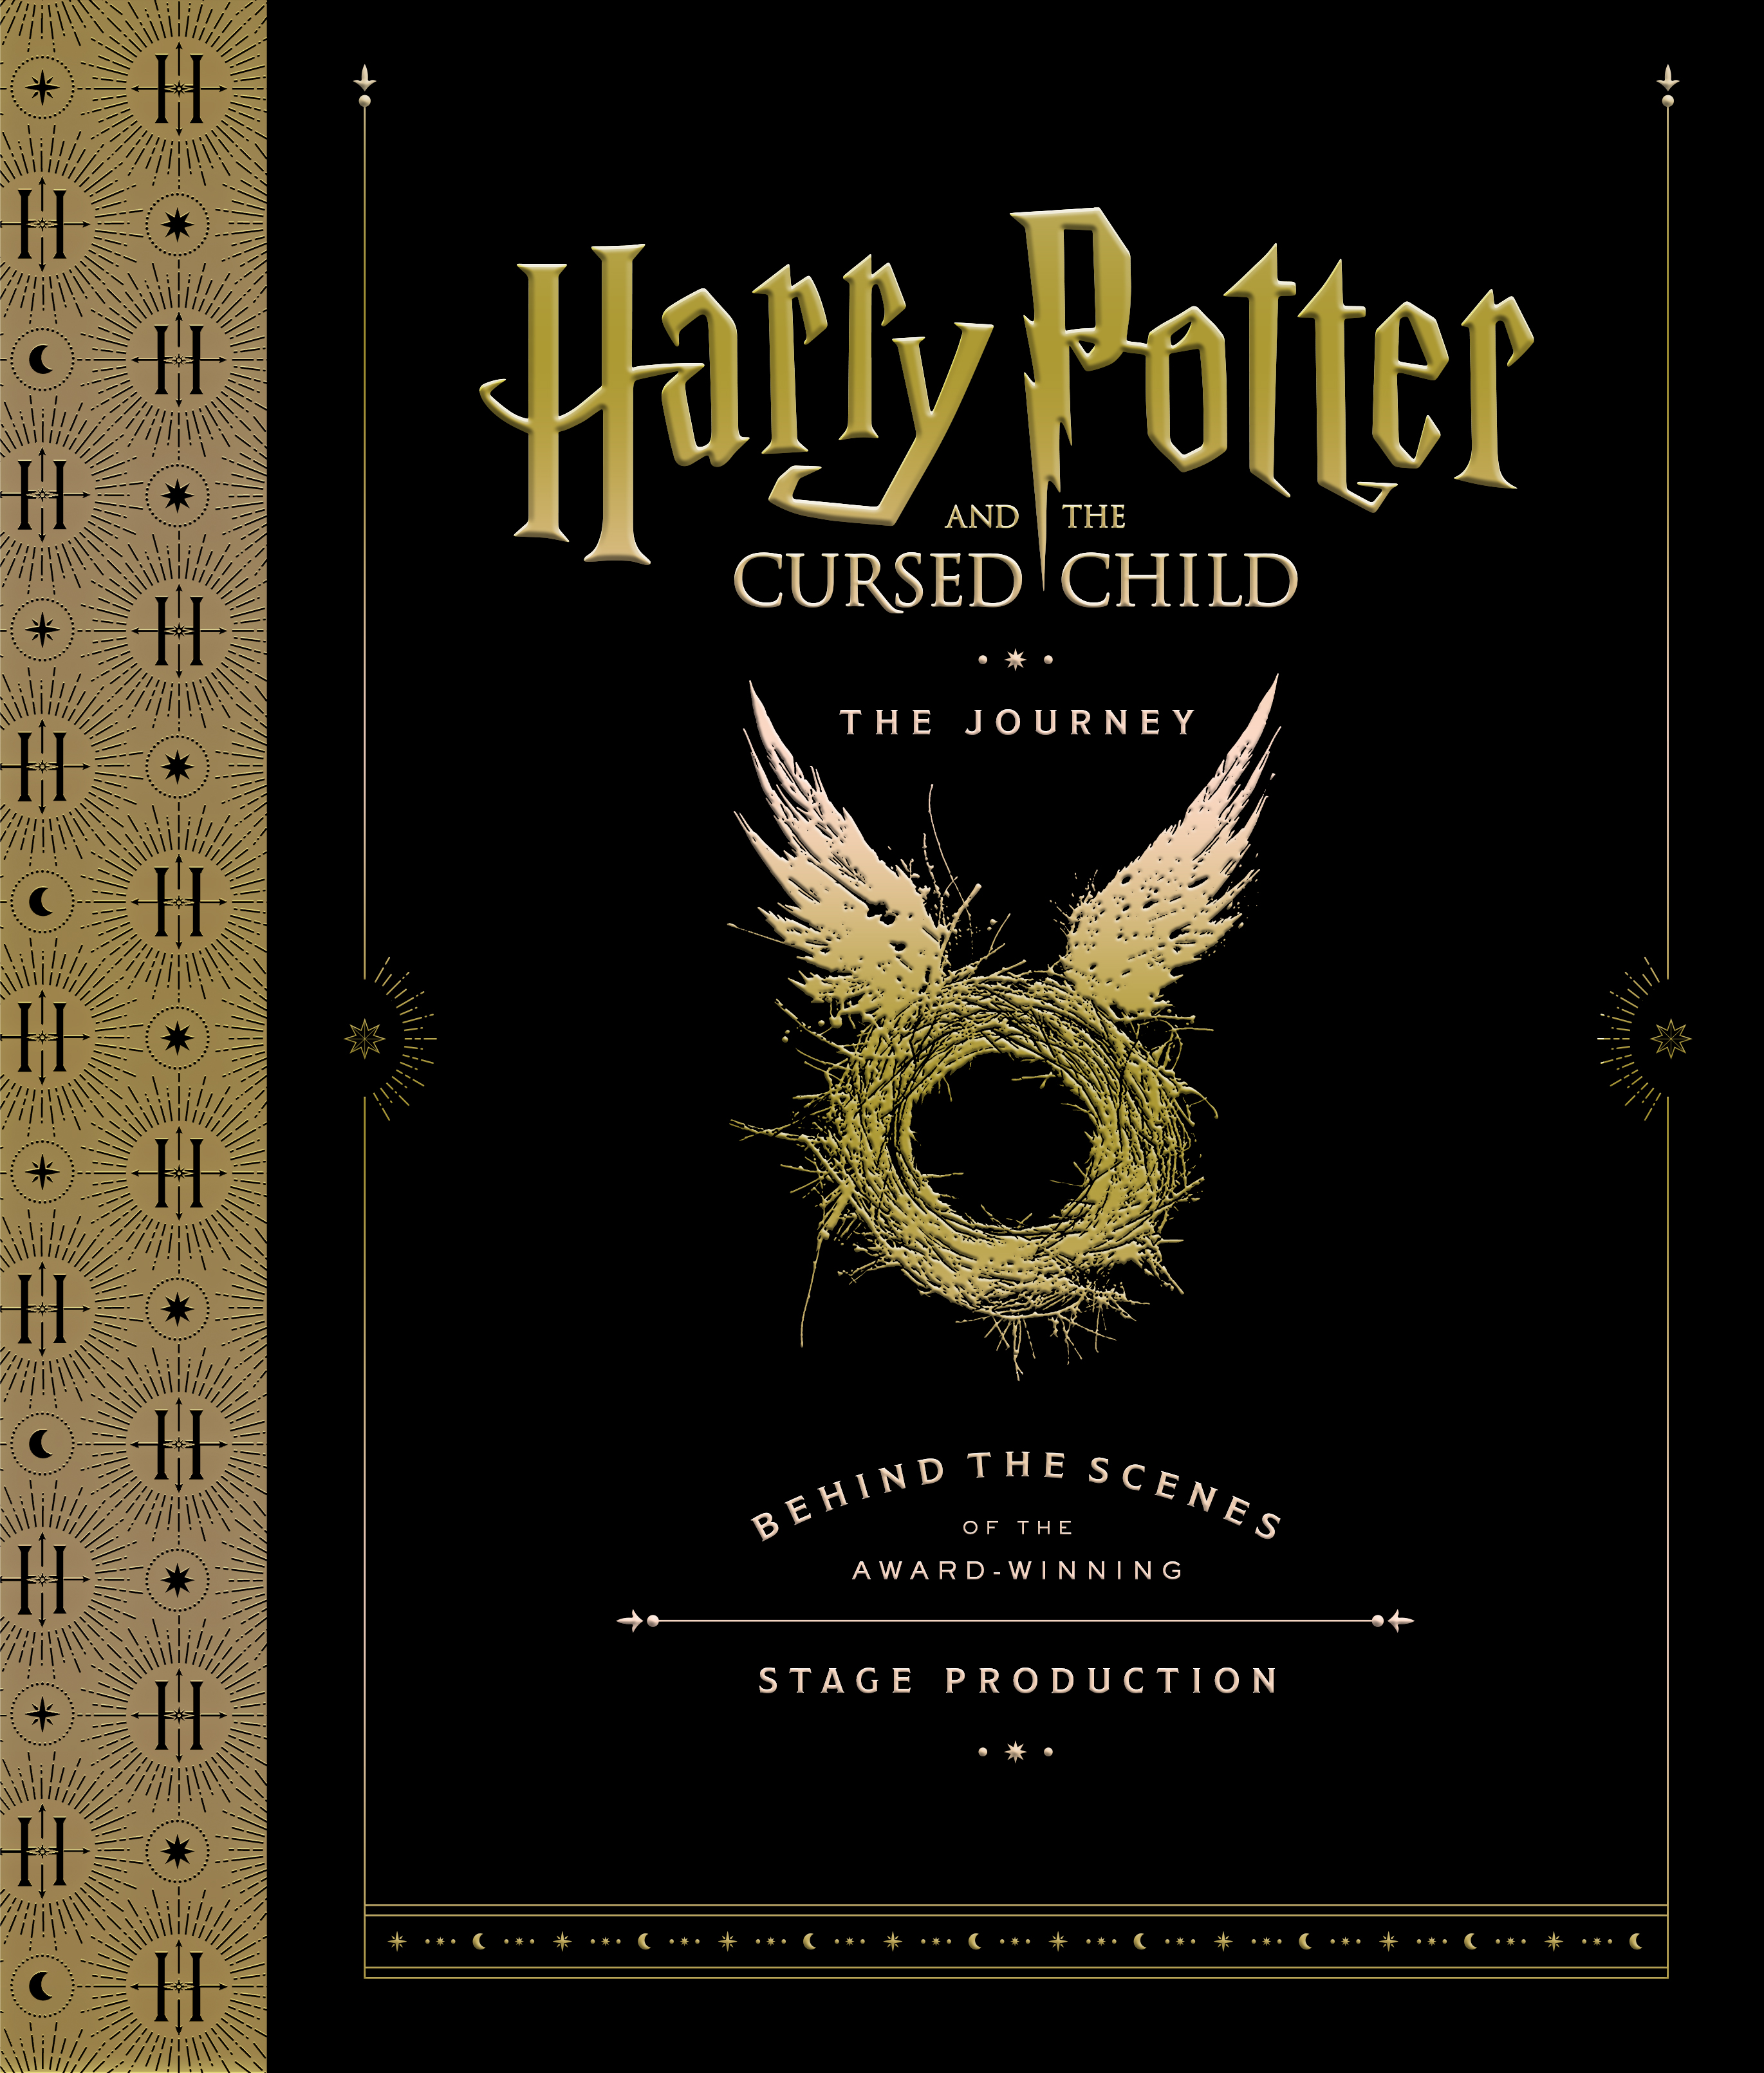 Final Harry Potter Cover Reveal Today at Scholastic Store - GeekDad